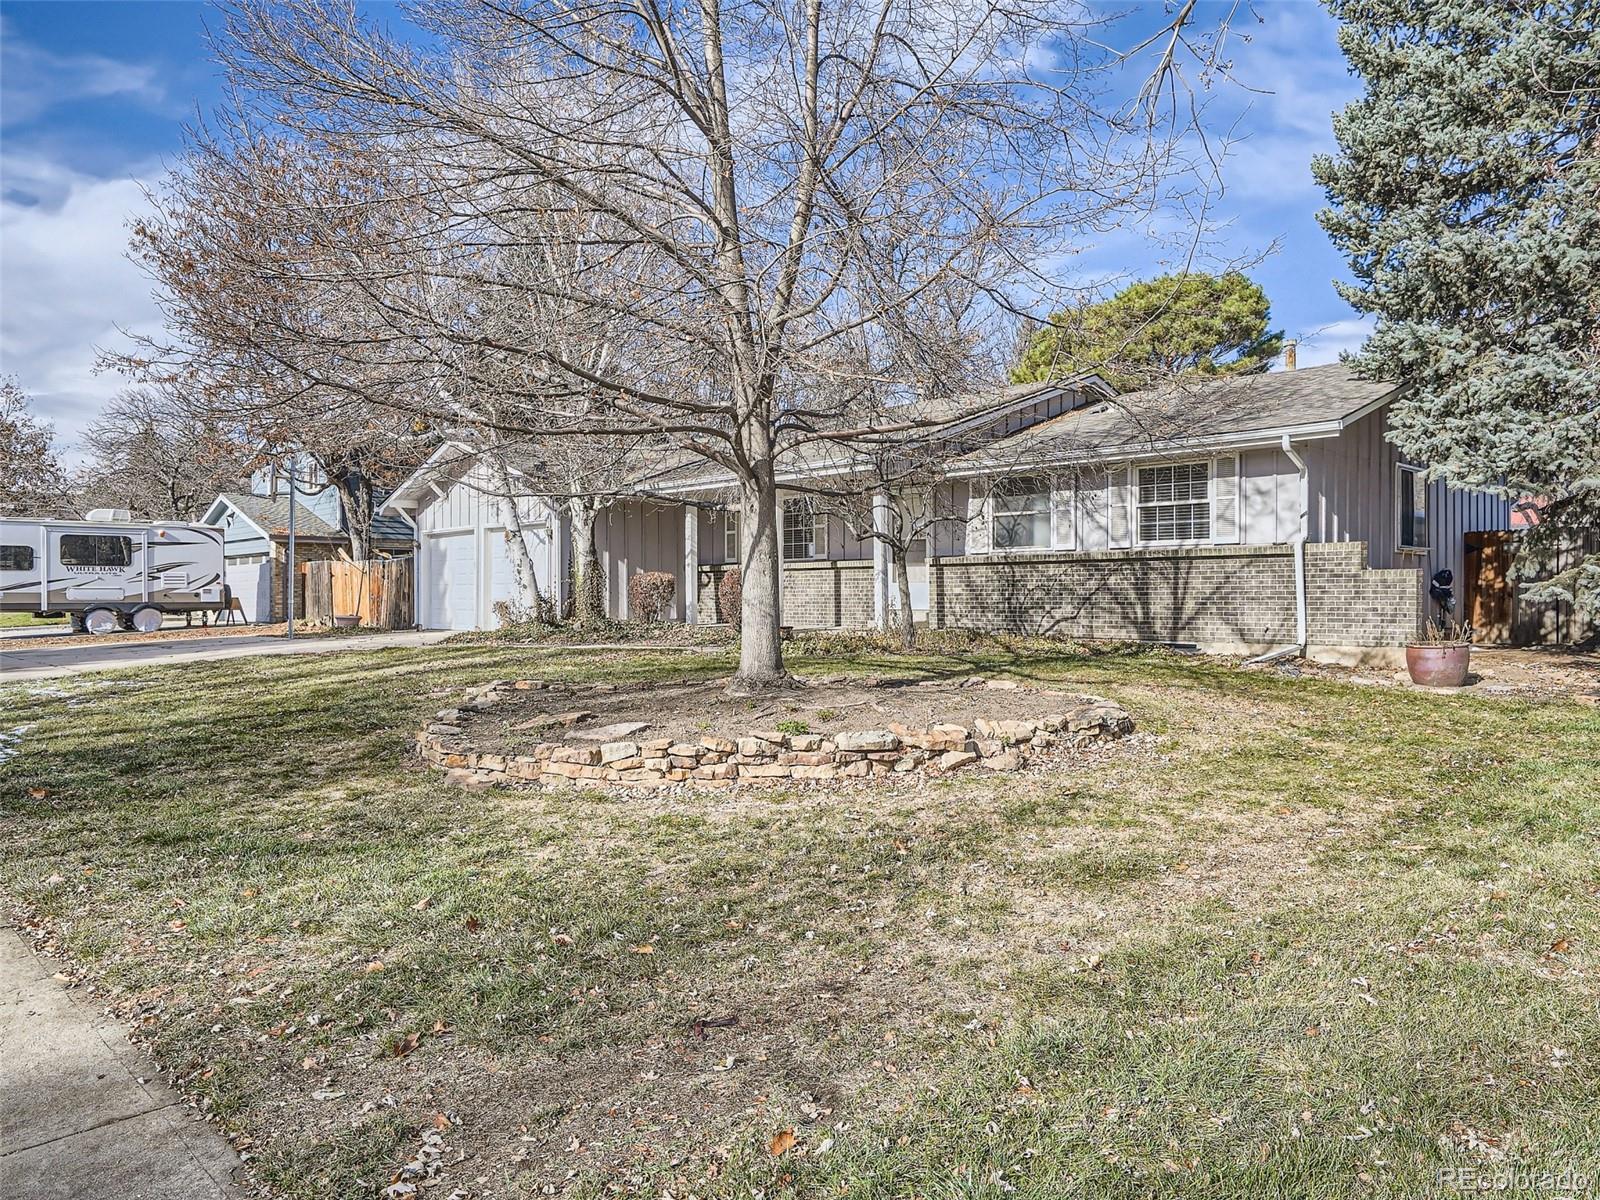 12165 w 68th place, Arvada sold home. Closed on 2024-02-15 for $665,000.